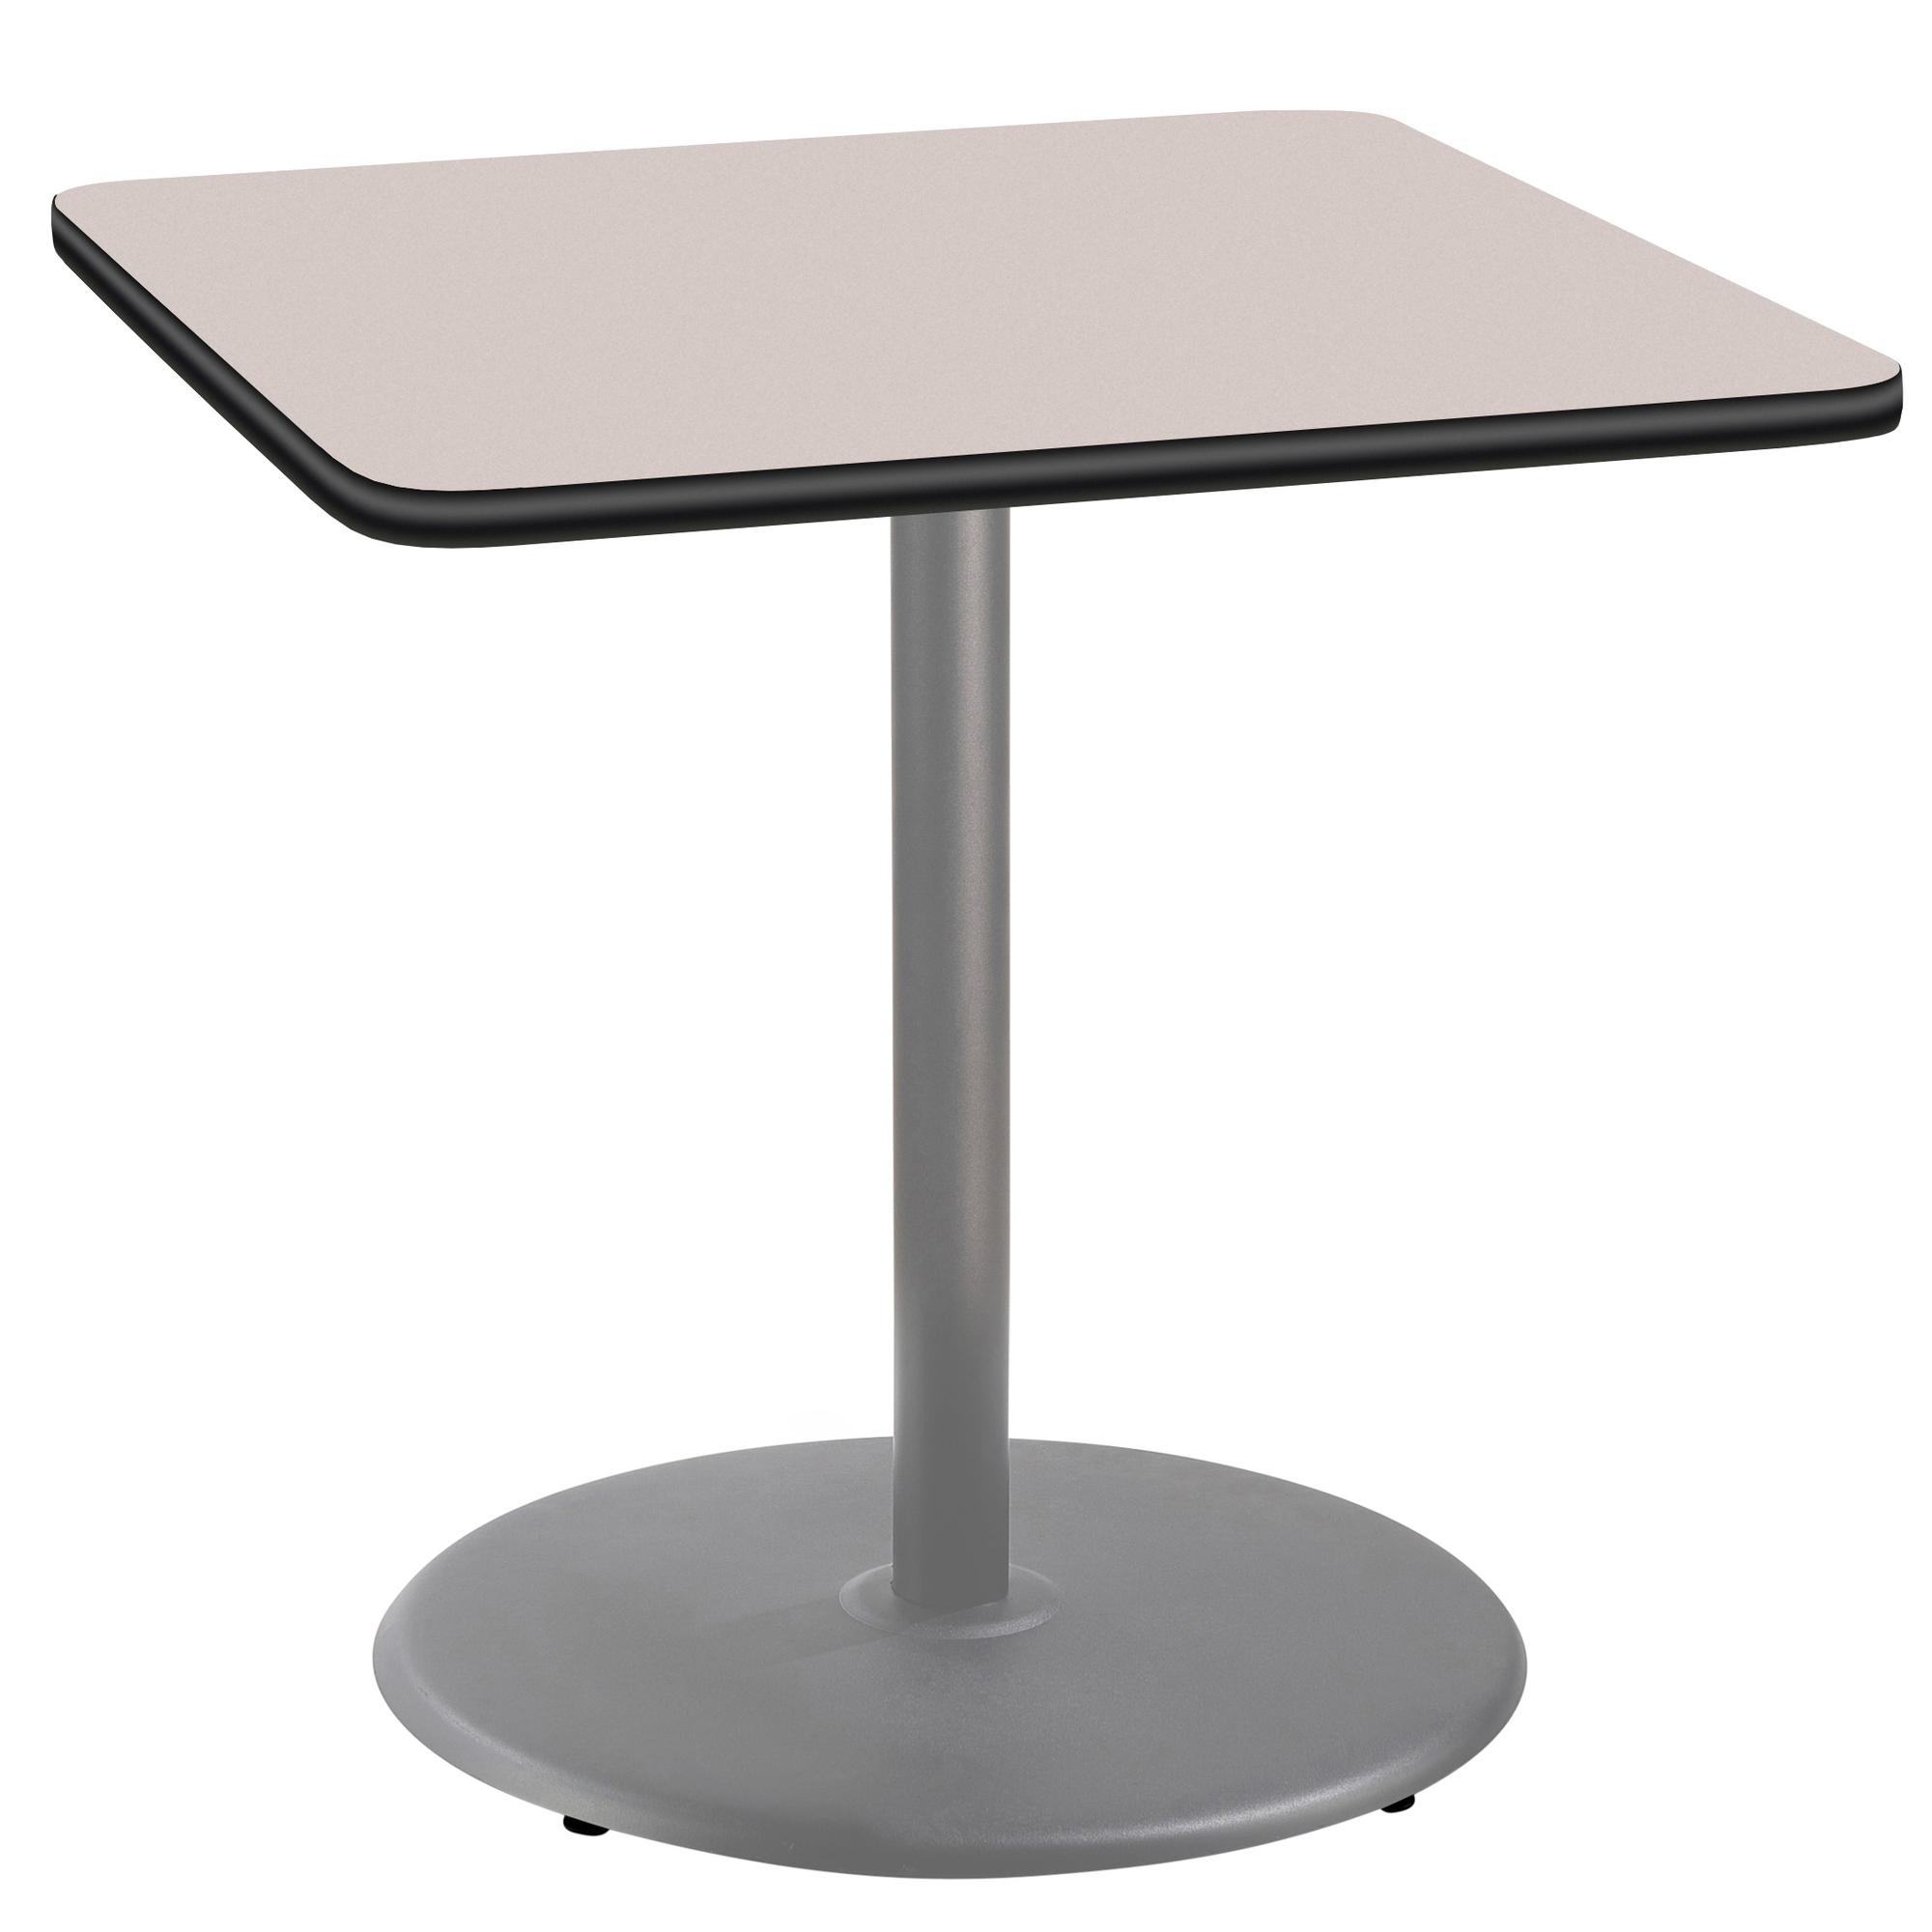 Cafe Table, 36x36x36 Square """"R"""" Base, Height 36 in, Model - National Public Seating CTG33636RCPBTMGY